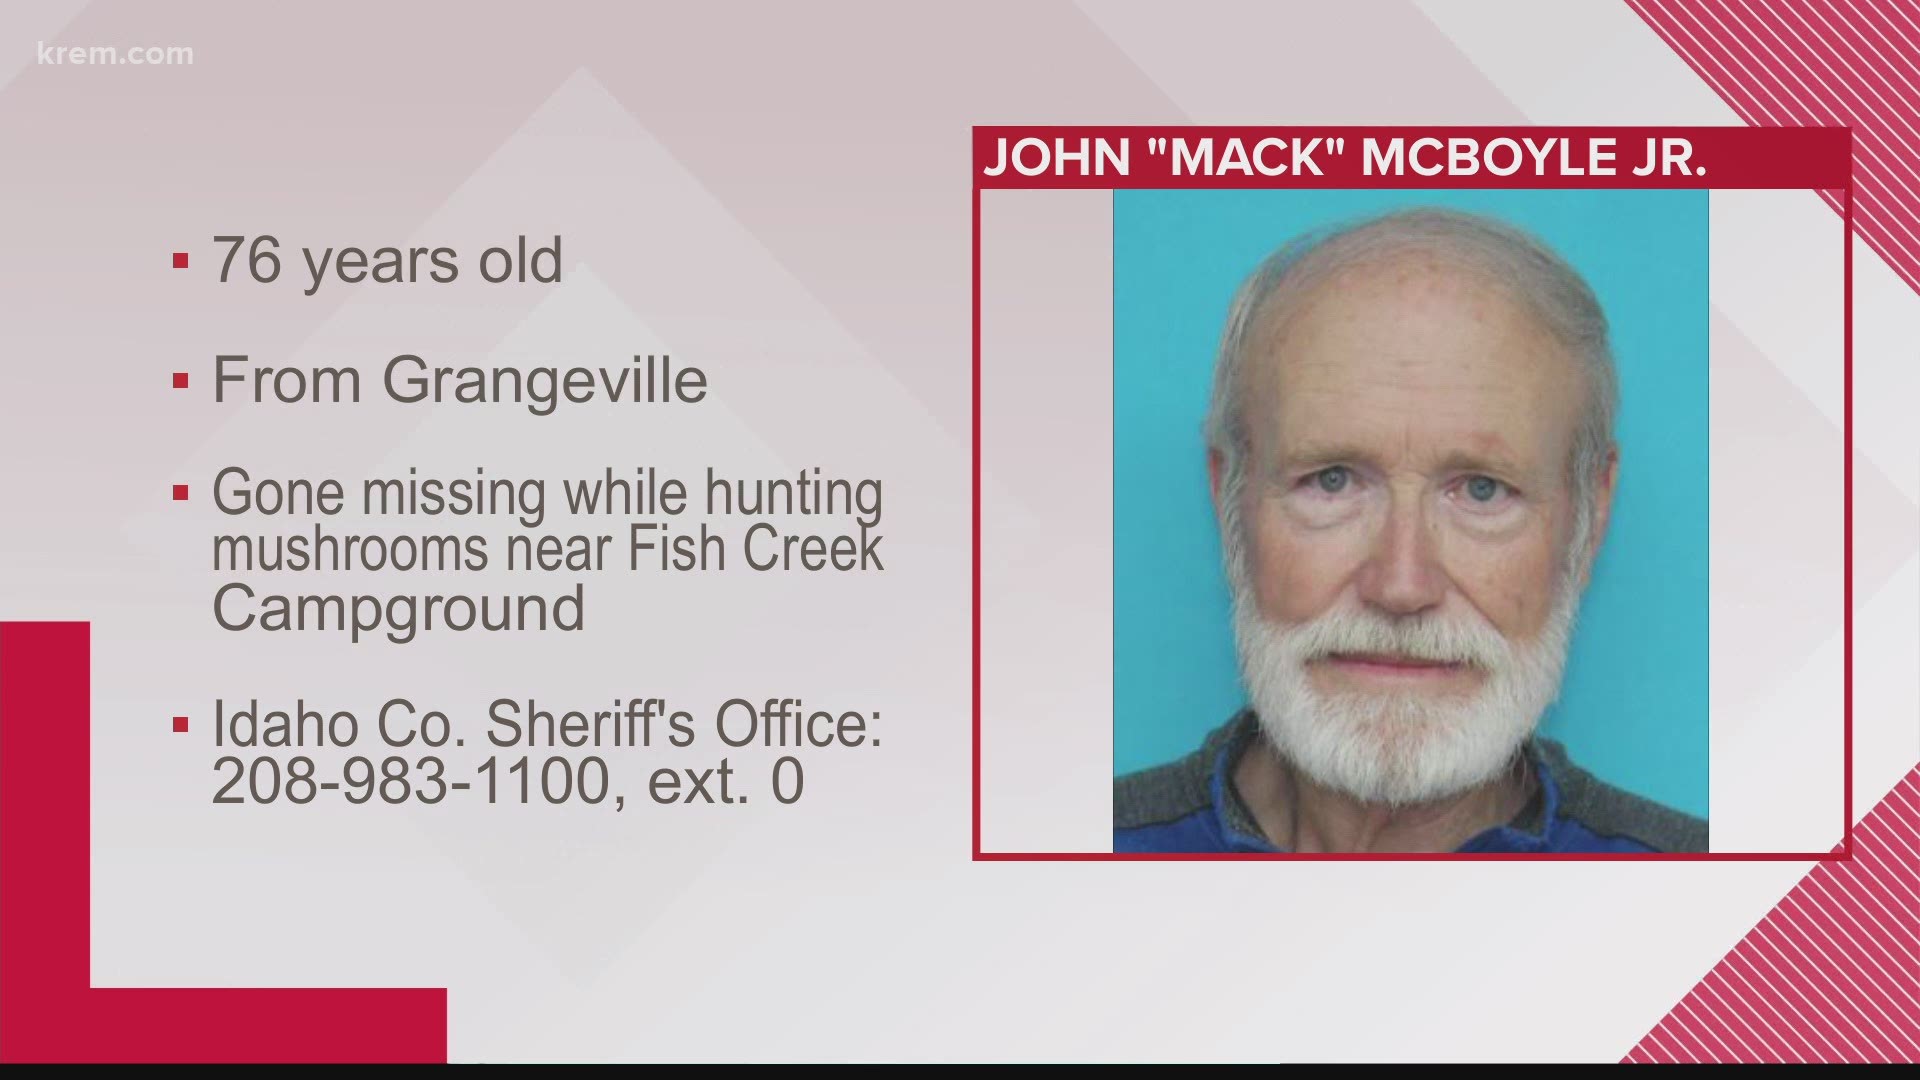 John "Mack" McBoyle Jr. is a 76-year-old from Grangeville.